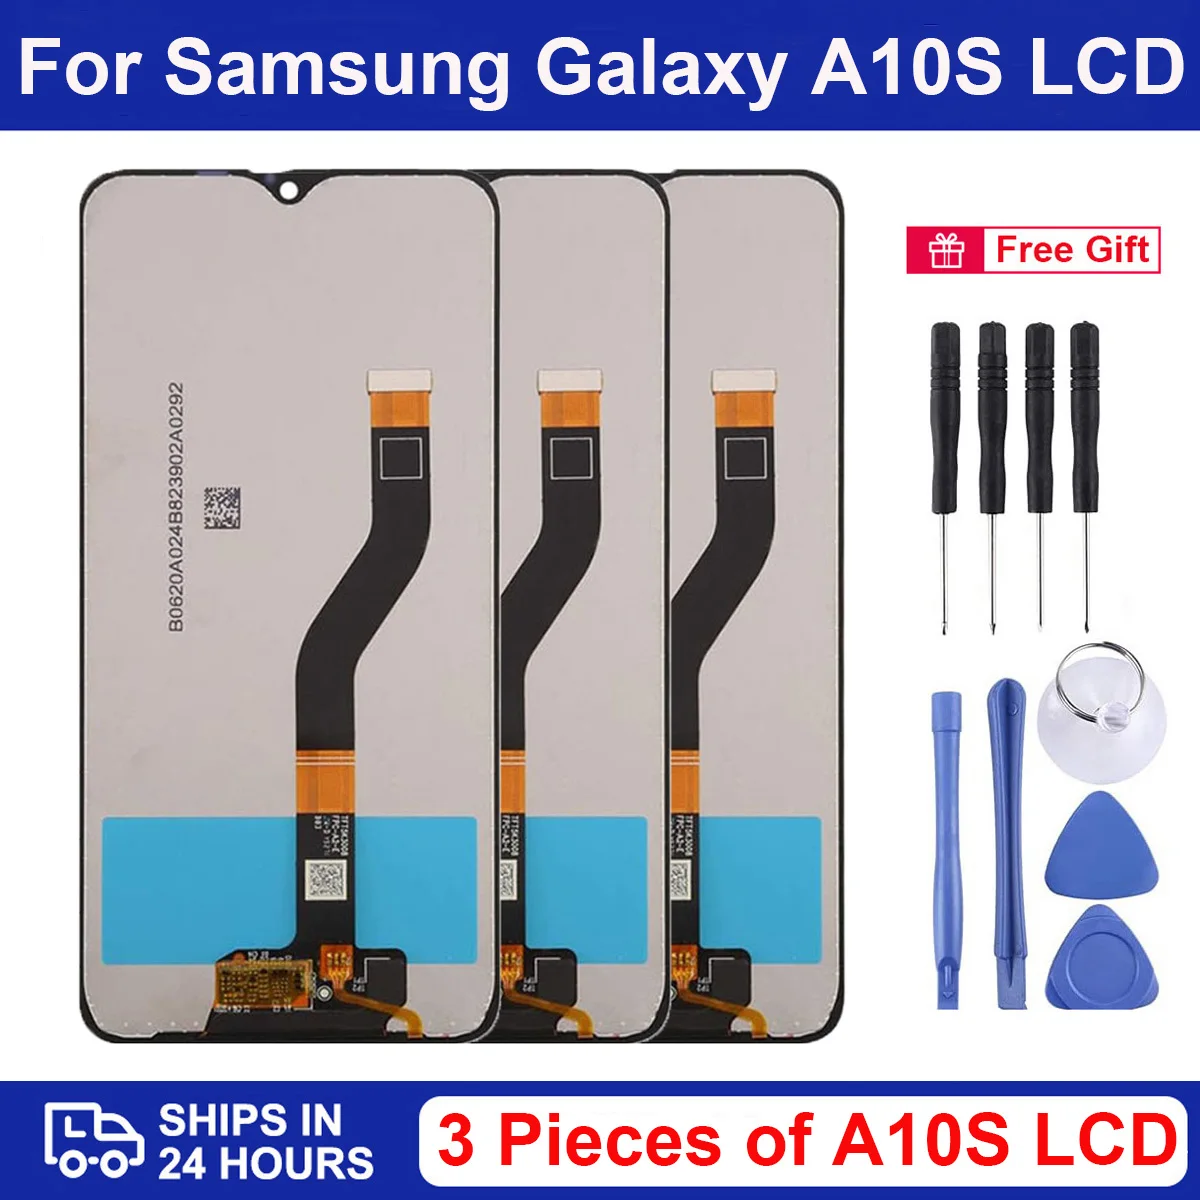 Enlarge Wholesale a10s Display For Samsung Galaxy A10S lcd A107 SM- A107F/DS A107F A107FD A107M a107 LCD Touch Screen Digitizer Assembly